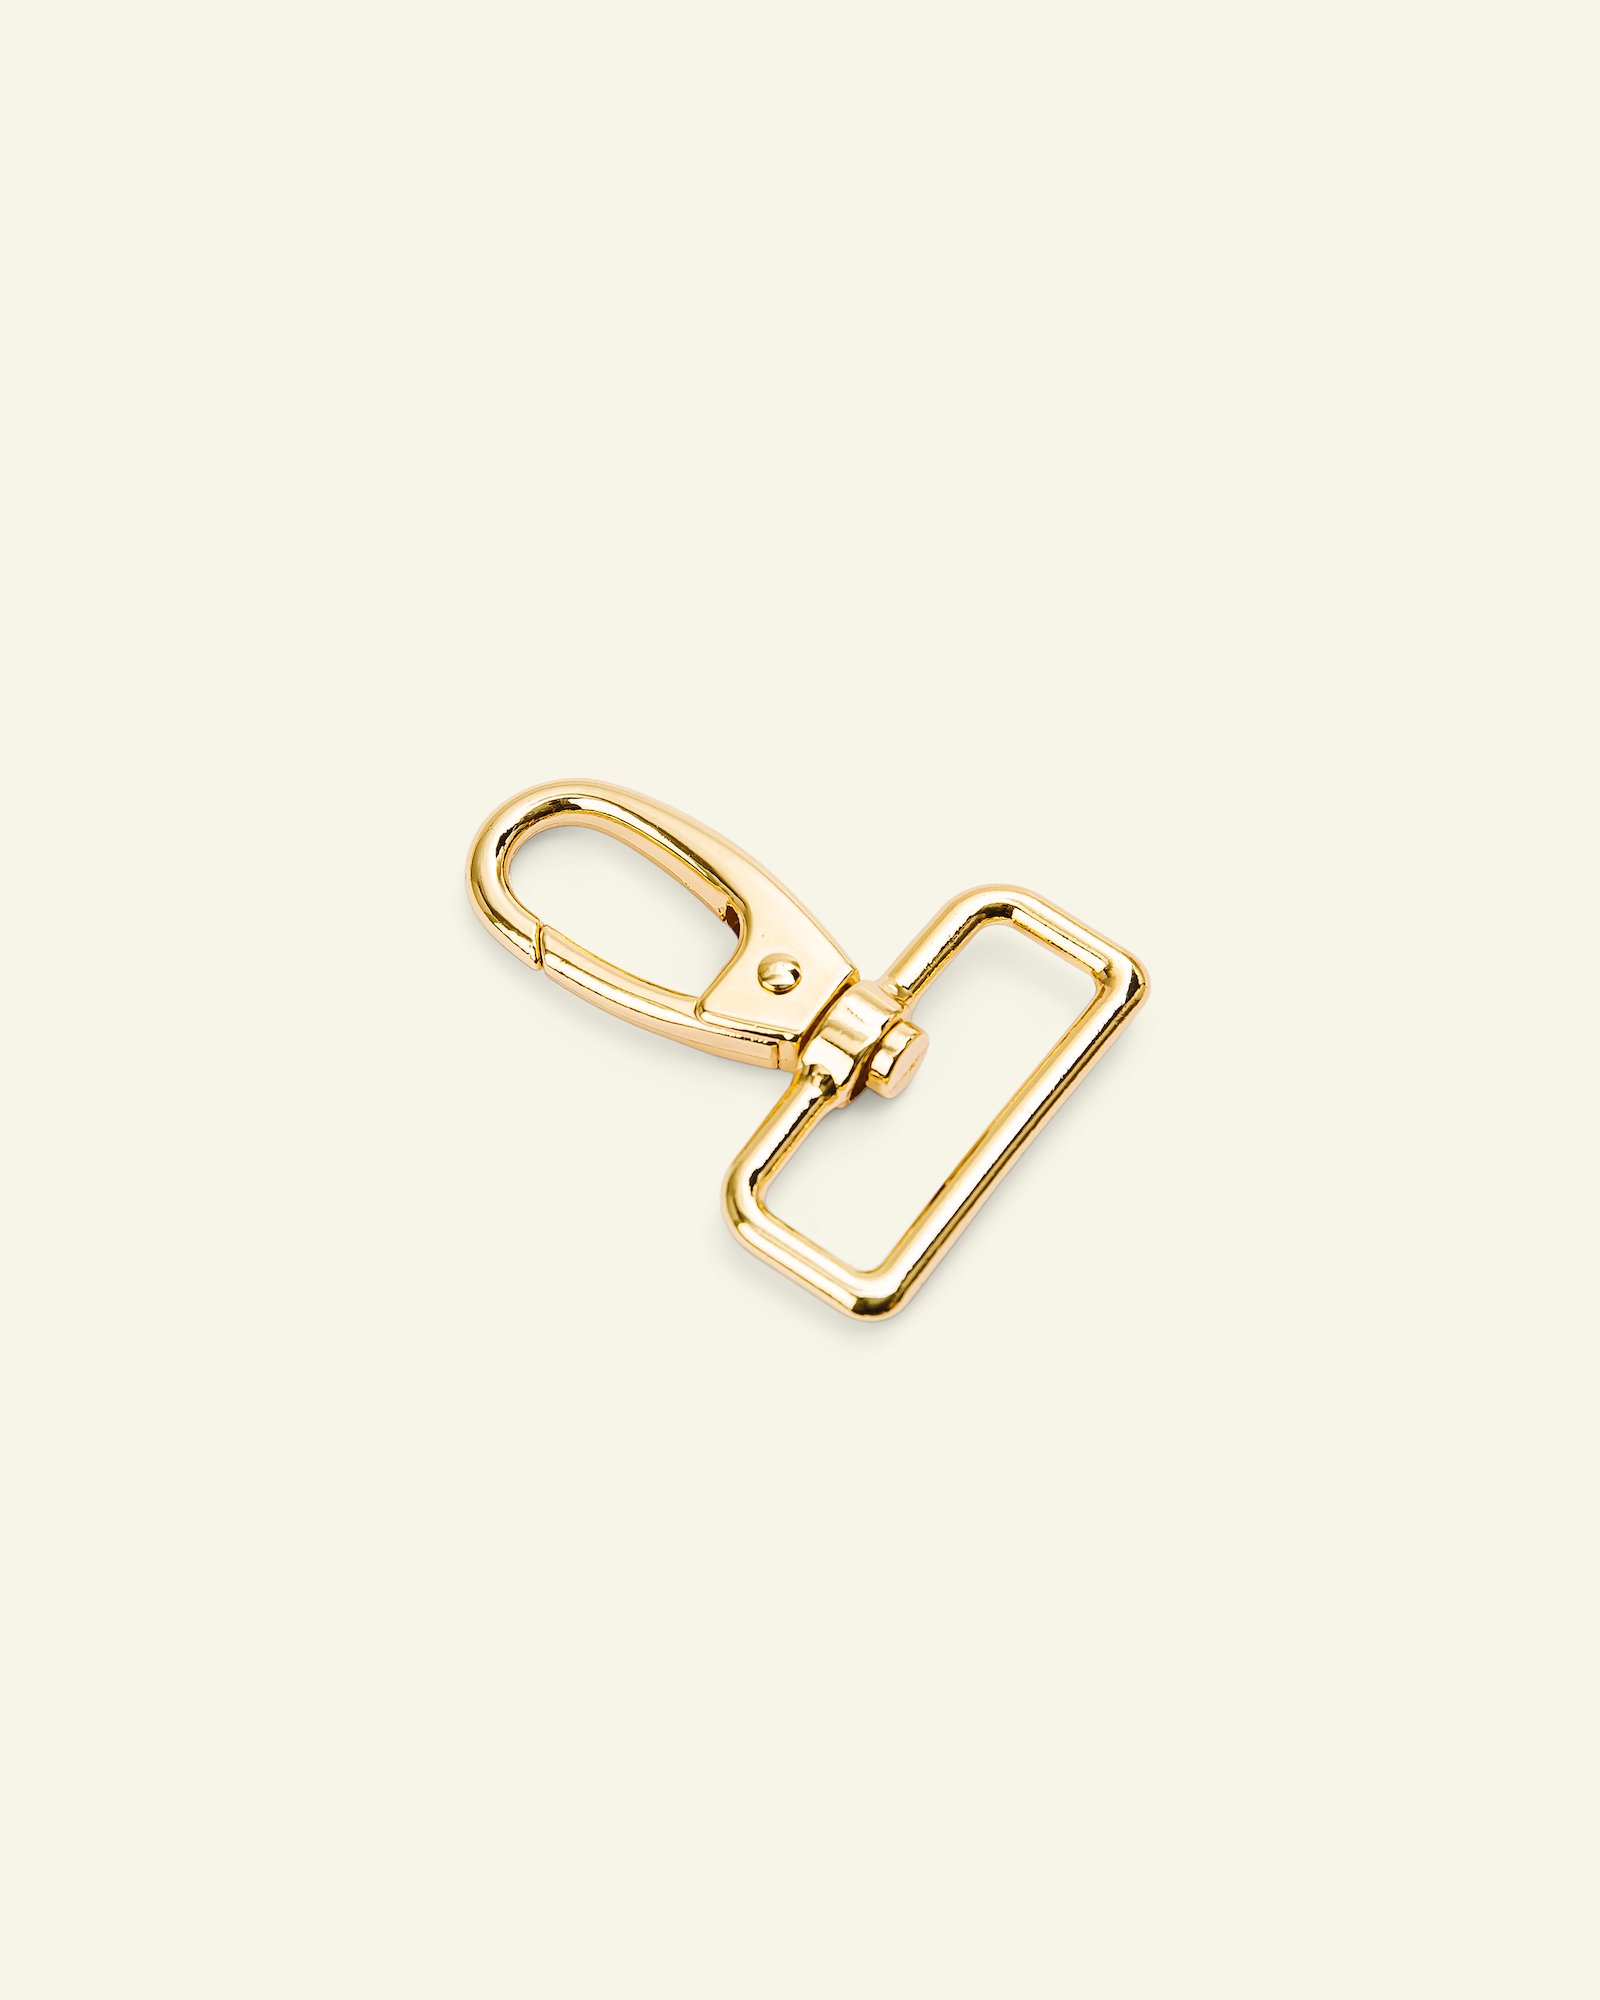 Snap hook metal 45x60mm gold colored 1pc 45111_pack